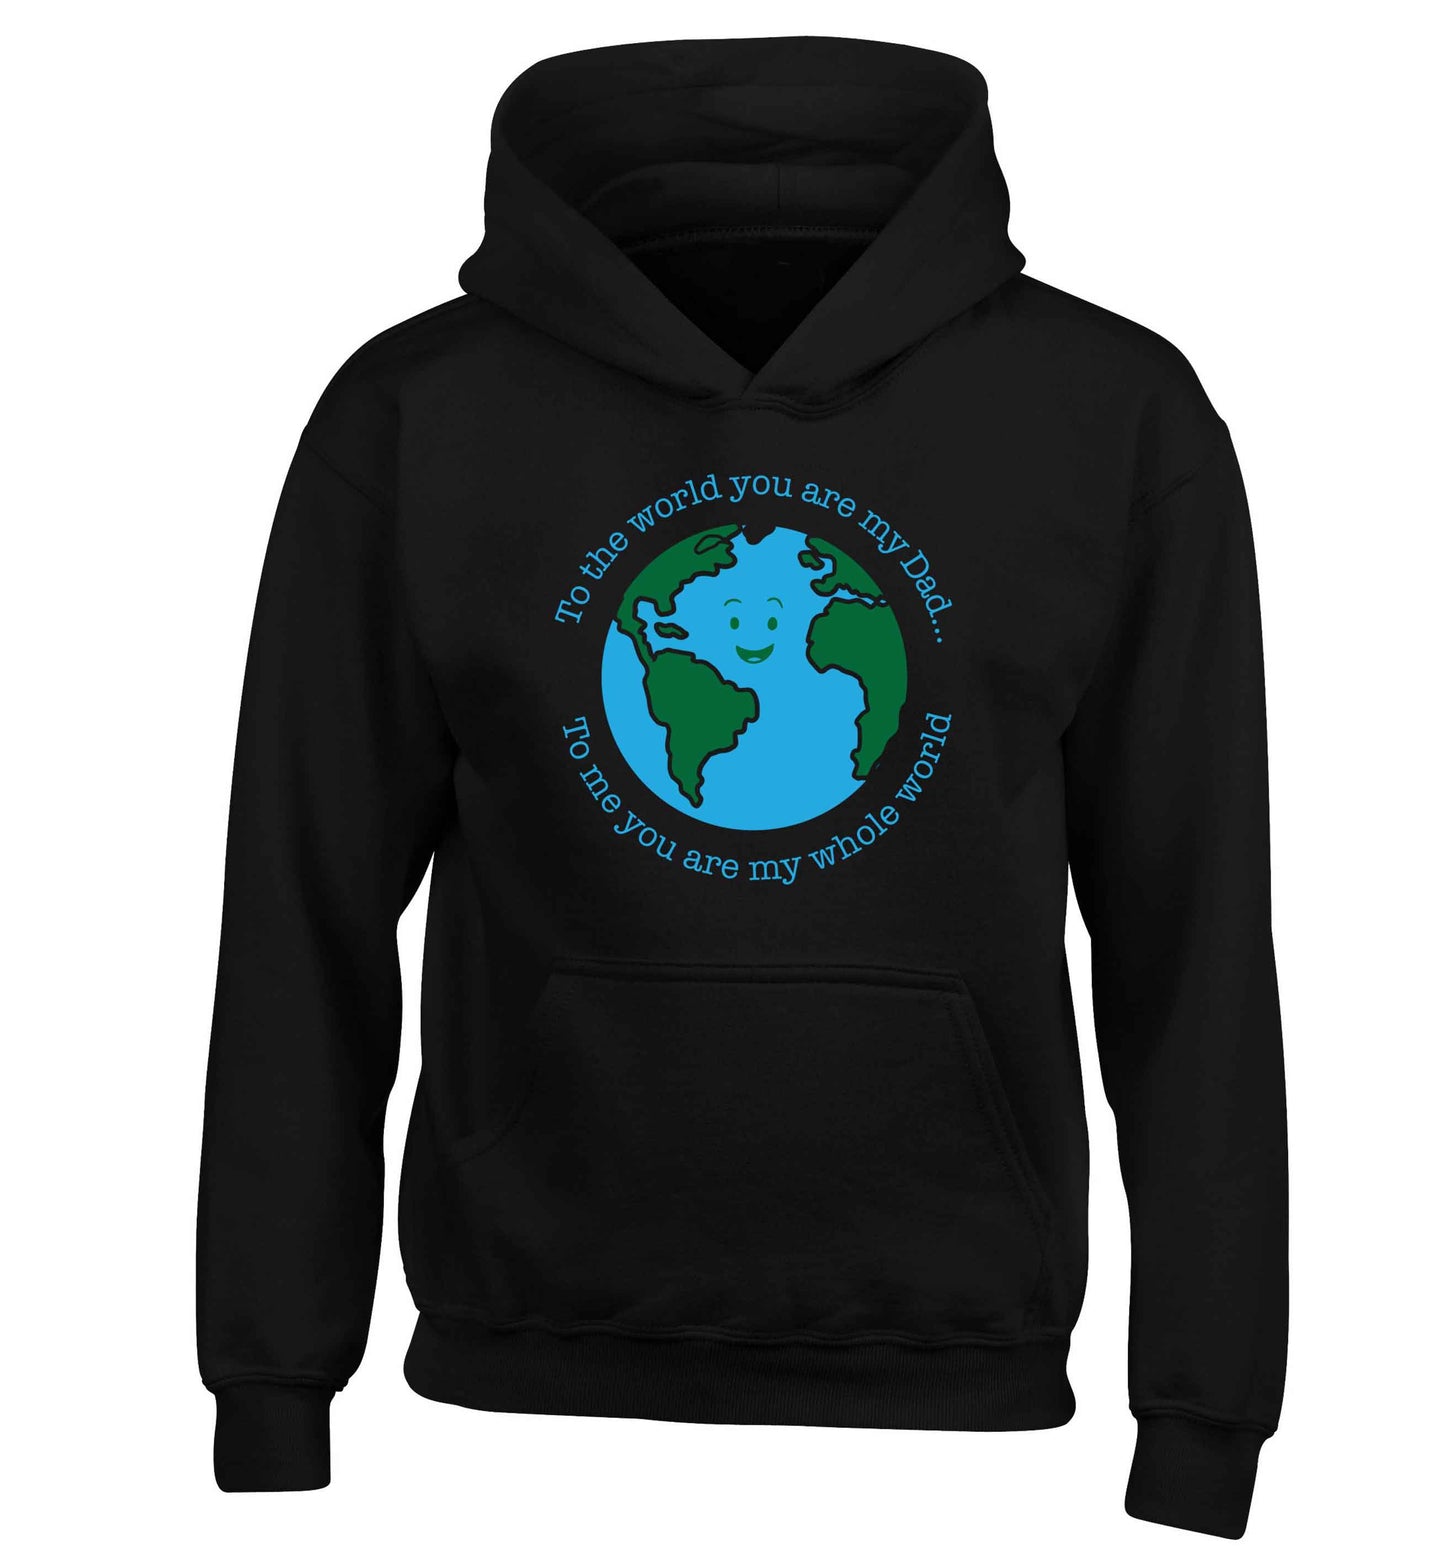 To the world you are my dad, to me you are my whole world children's black hoodie 12-13 Years